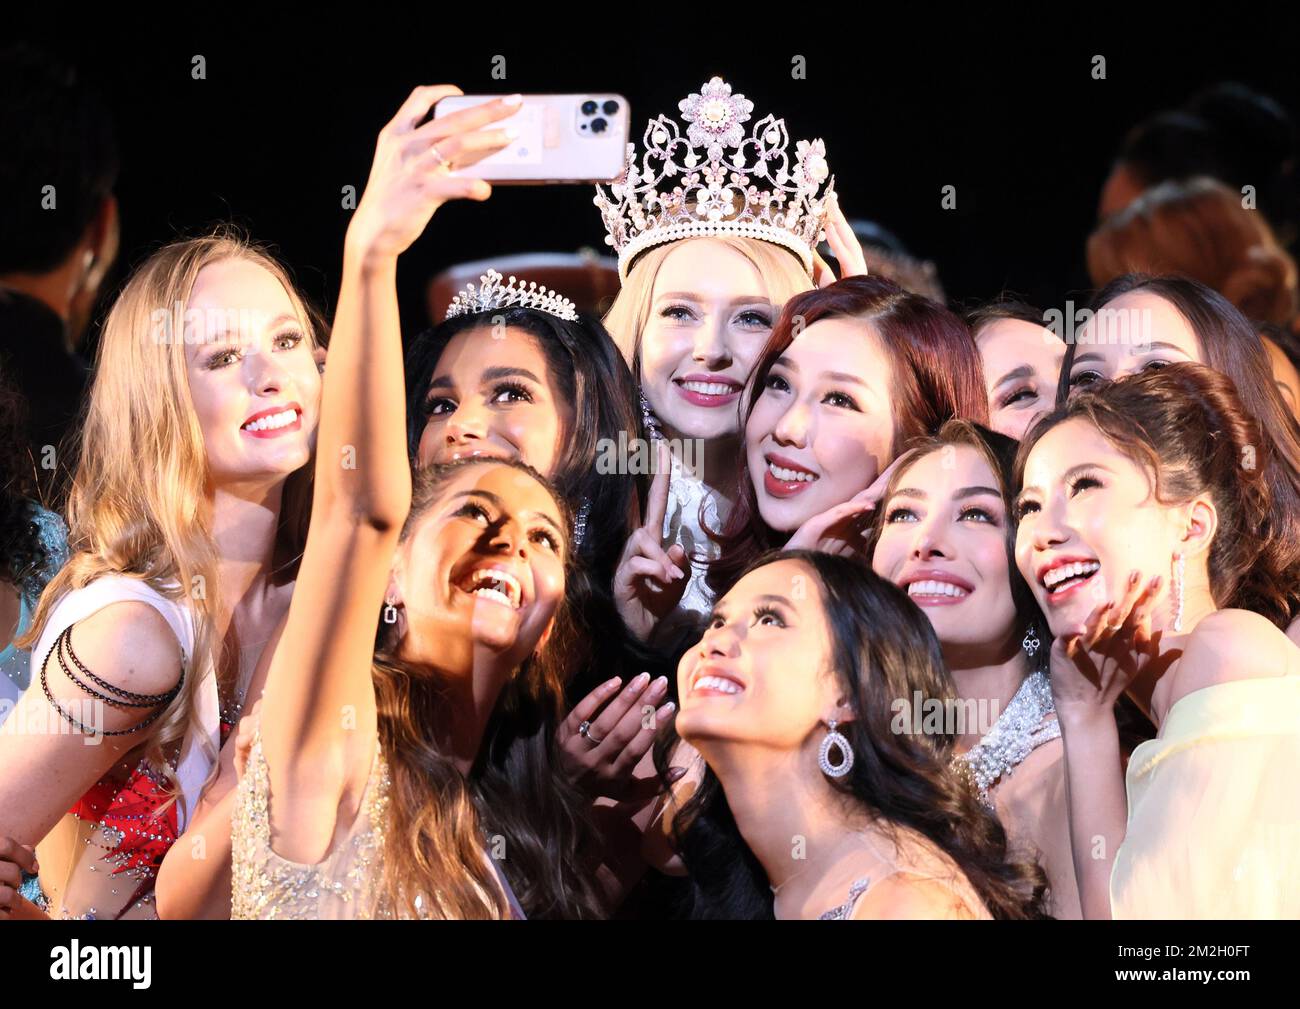 Tokyo, Japan. 13th Dec, 2022. Miss Germany Jasmin Selberg (C) of Miss International 2022 takes a selfie with other contestants after the Miss International Beauty Pageant 2022 in Tokyo on Tuesday, December 13, 2022. 66 beauties from the world gathered in Tokyo for the Miss International Beauty pageant, the first time in three years. Credit: Yoshio Tsunoda/AFLO/Alamy Live News Stock Photo